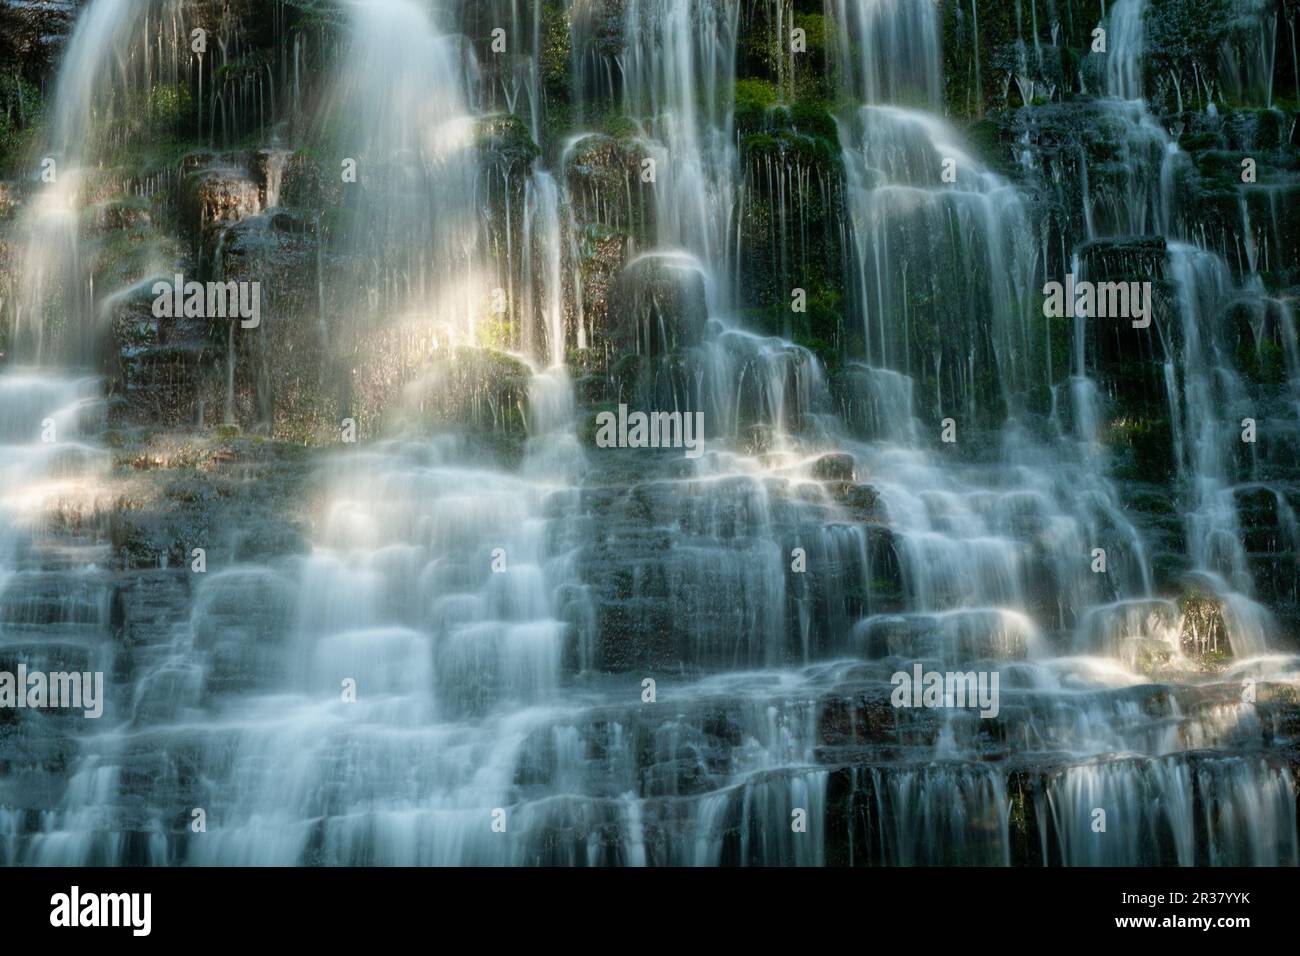 Cascata e luce solare, Short Springs state Natural Area, Tennessee Foto Stock